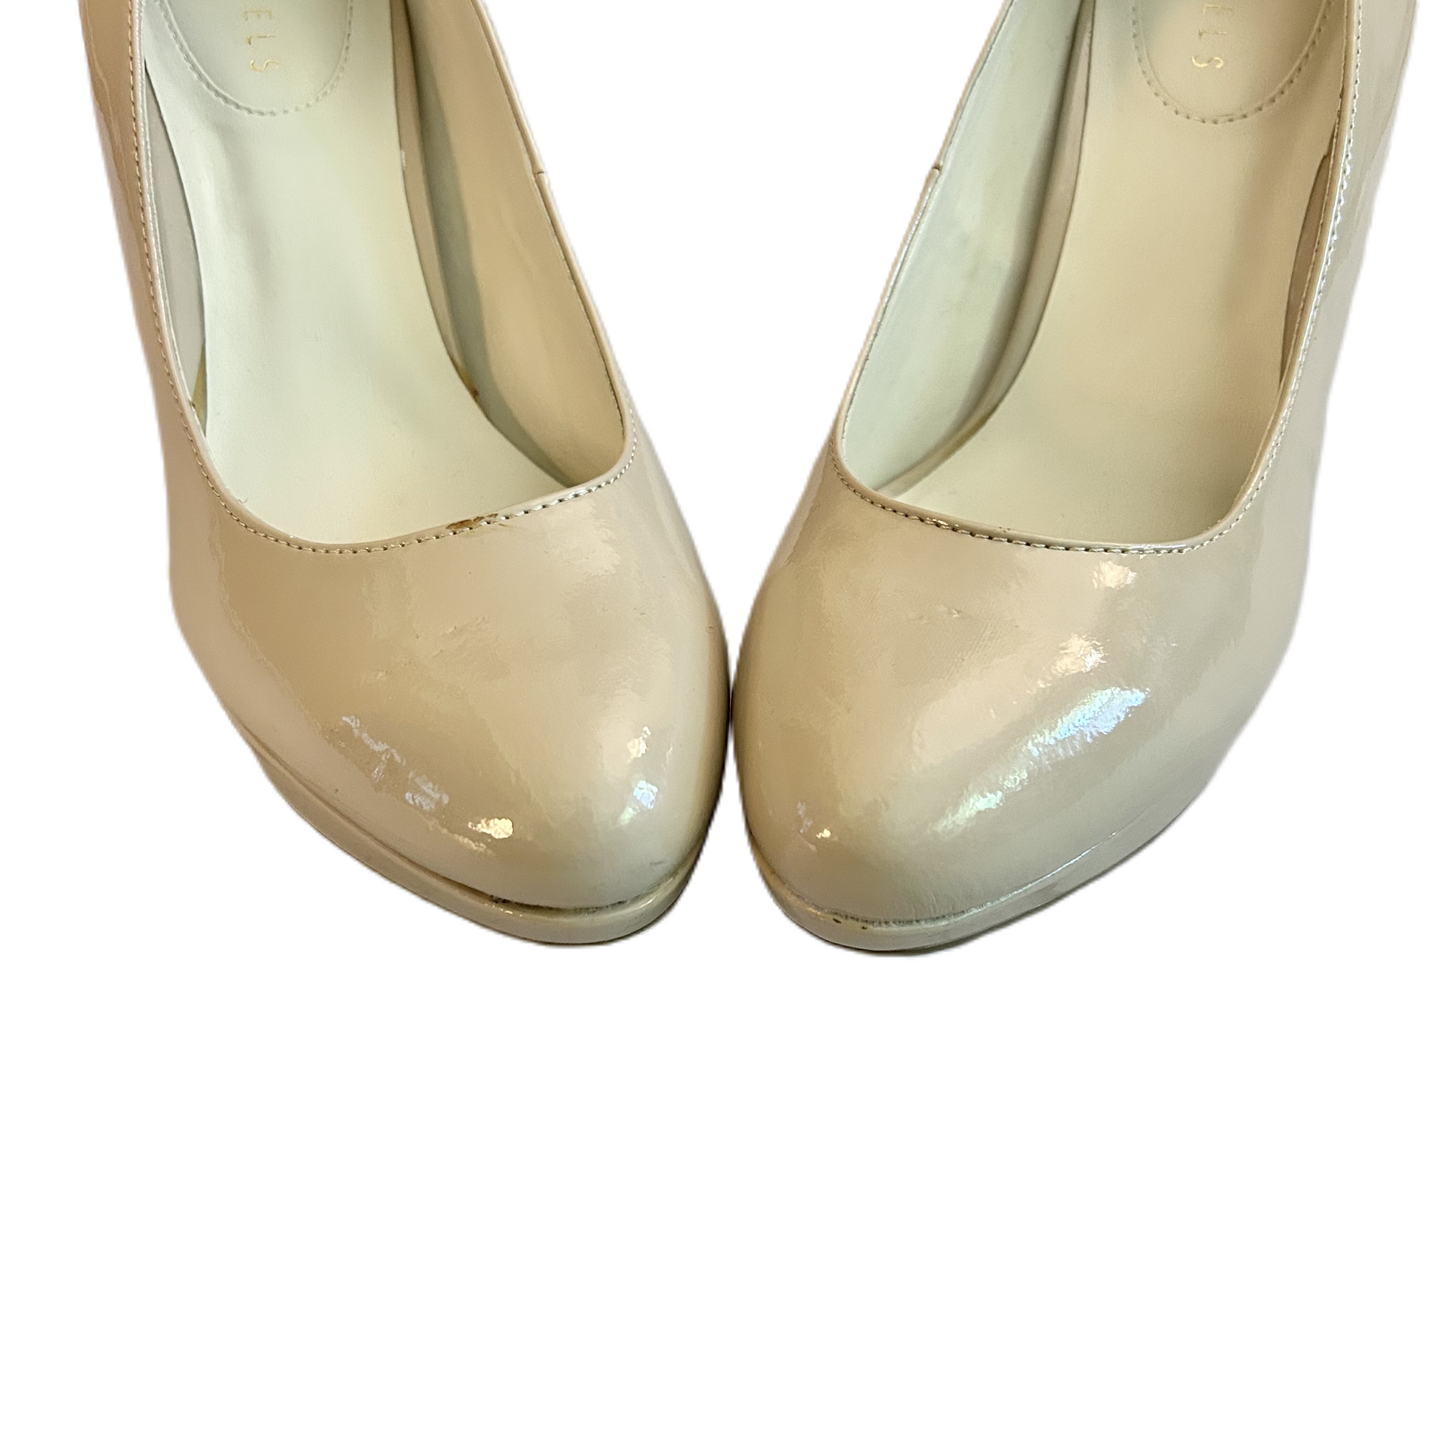 Tan Shoes Heels Stiletto By Nickles, Size: 9.5